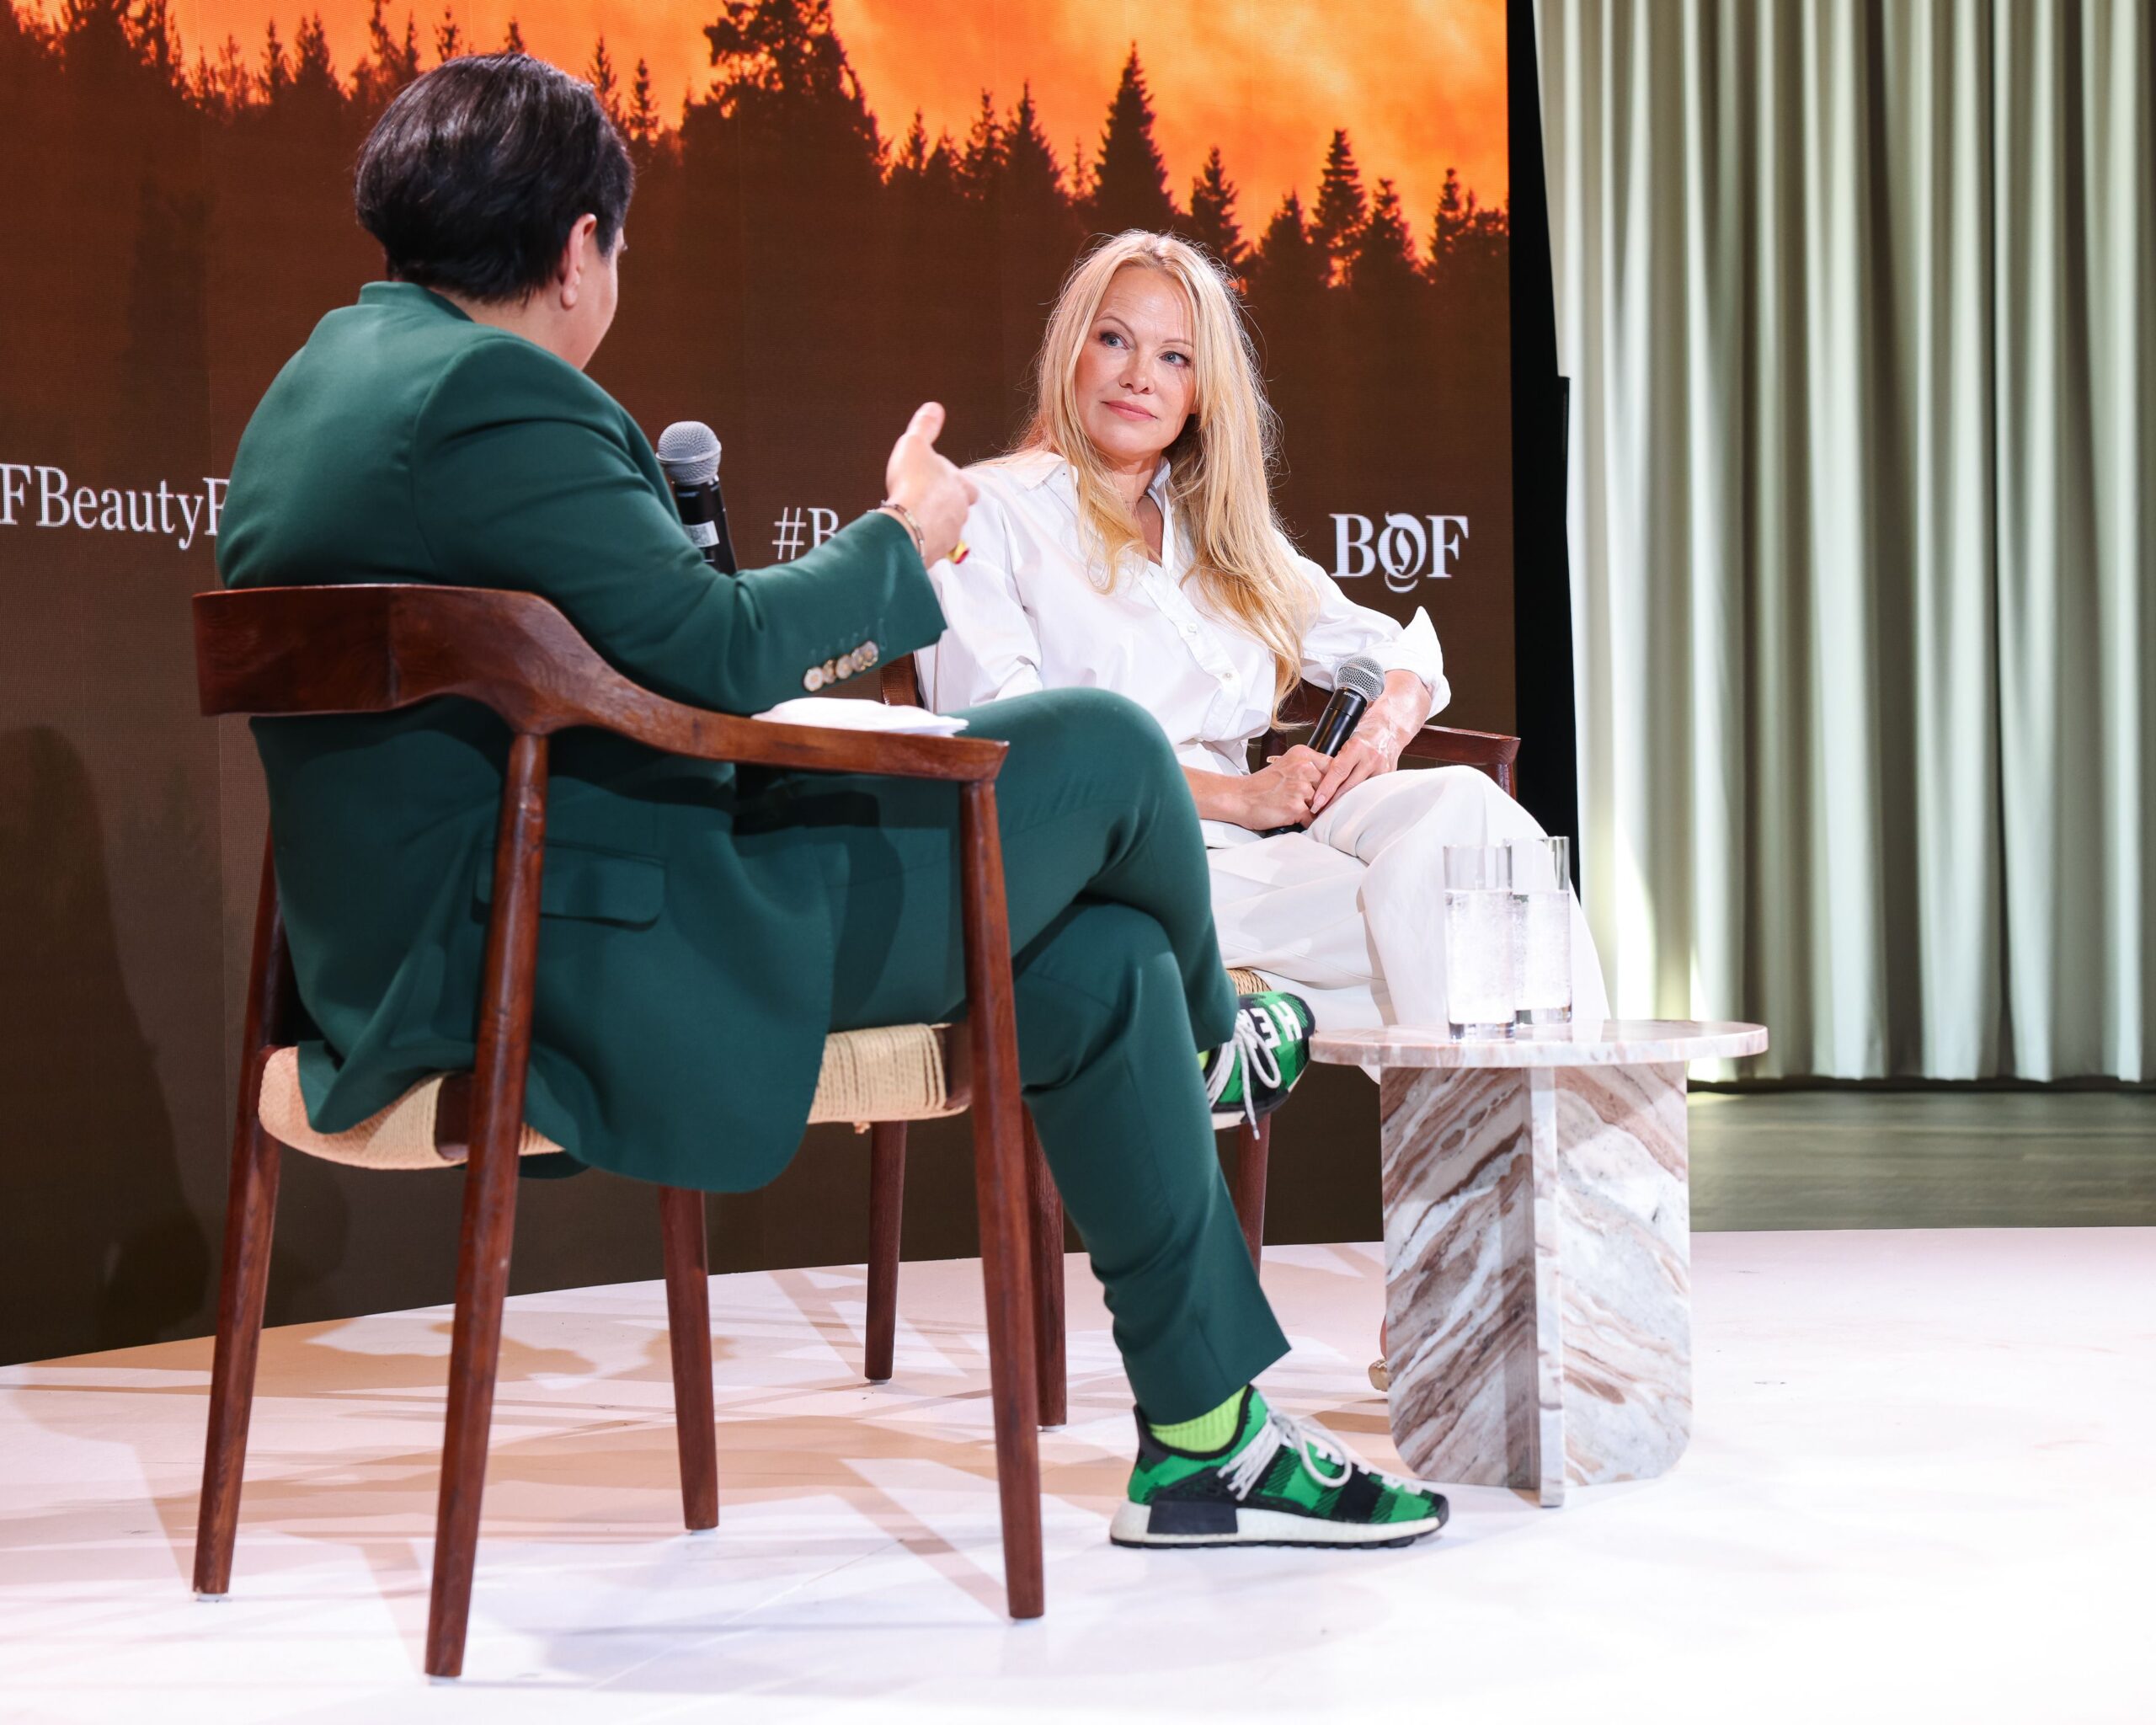 The BoF Podcast | Why Pamela Anderson Is Taking Control of Her Own Beauty Story